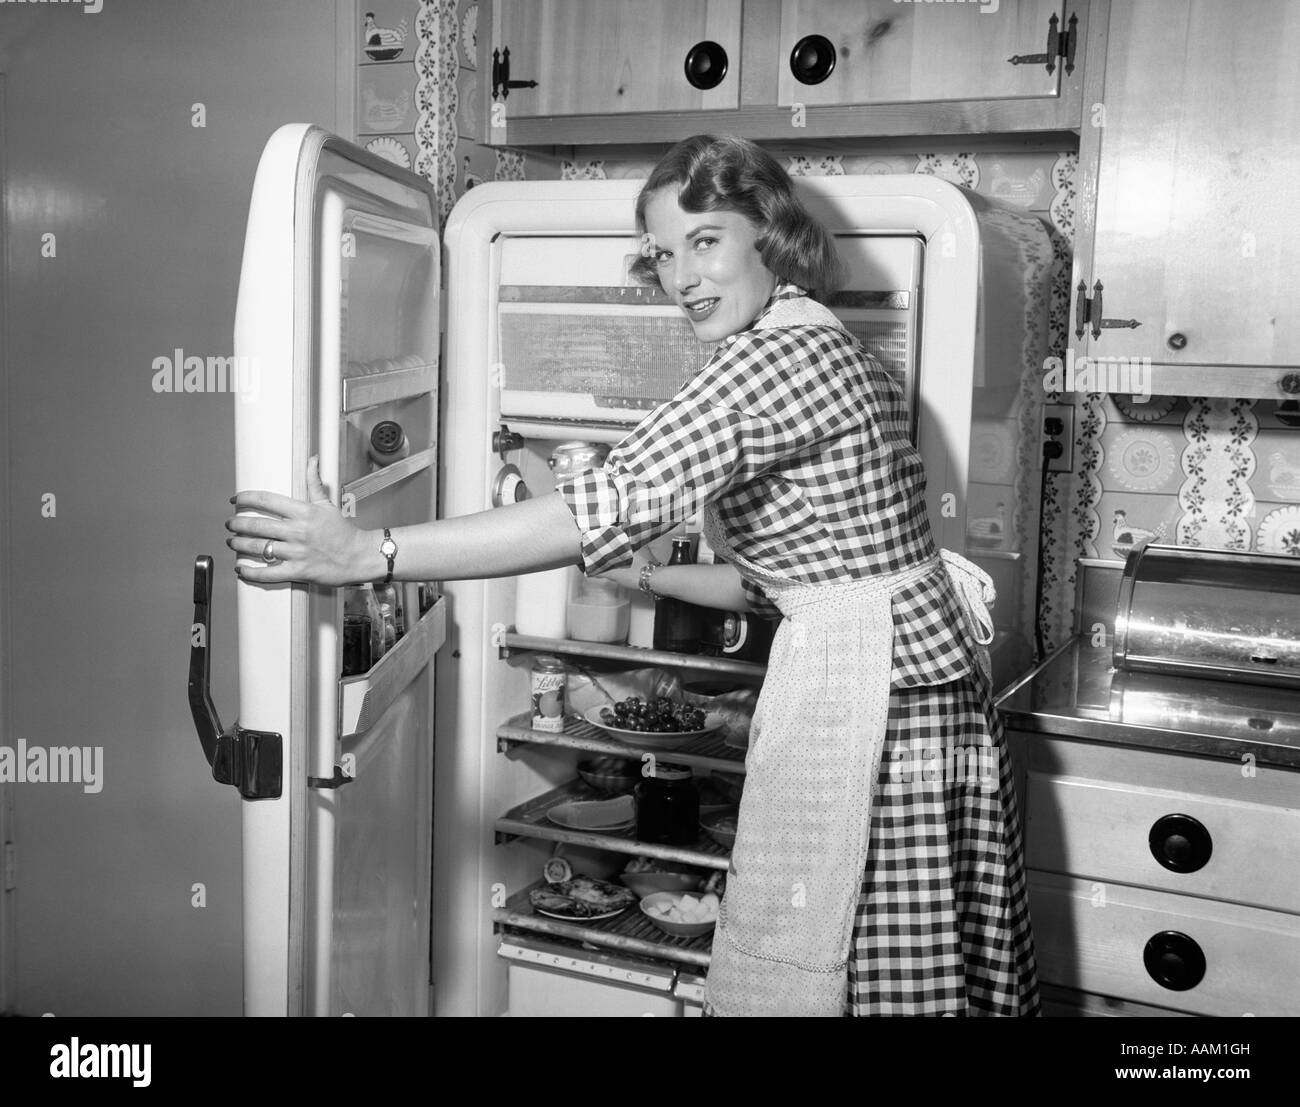 1950s WOMAN WEARING GINGHAM DRESS AND APRON OPENING REFRIGERATOR DOOR Stock Photo